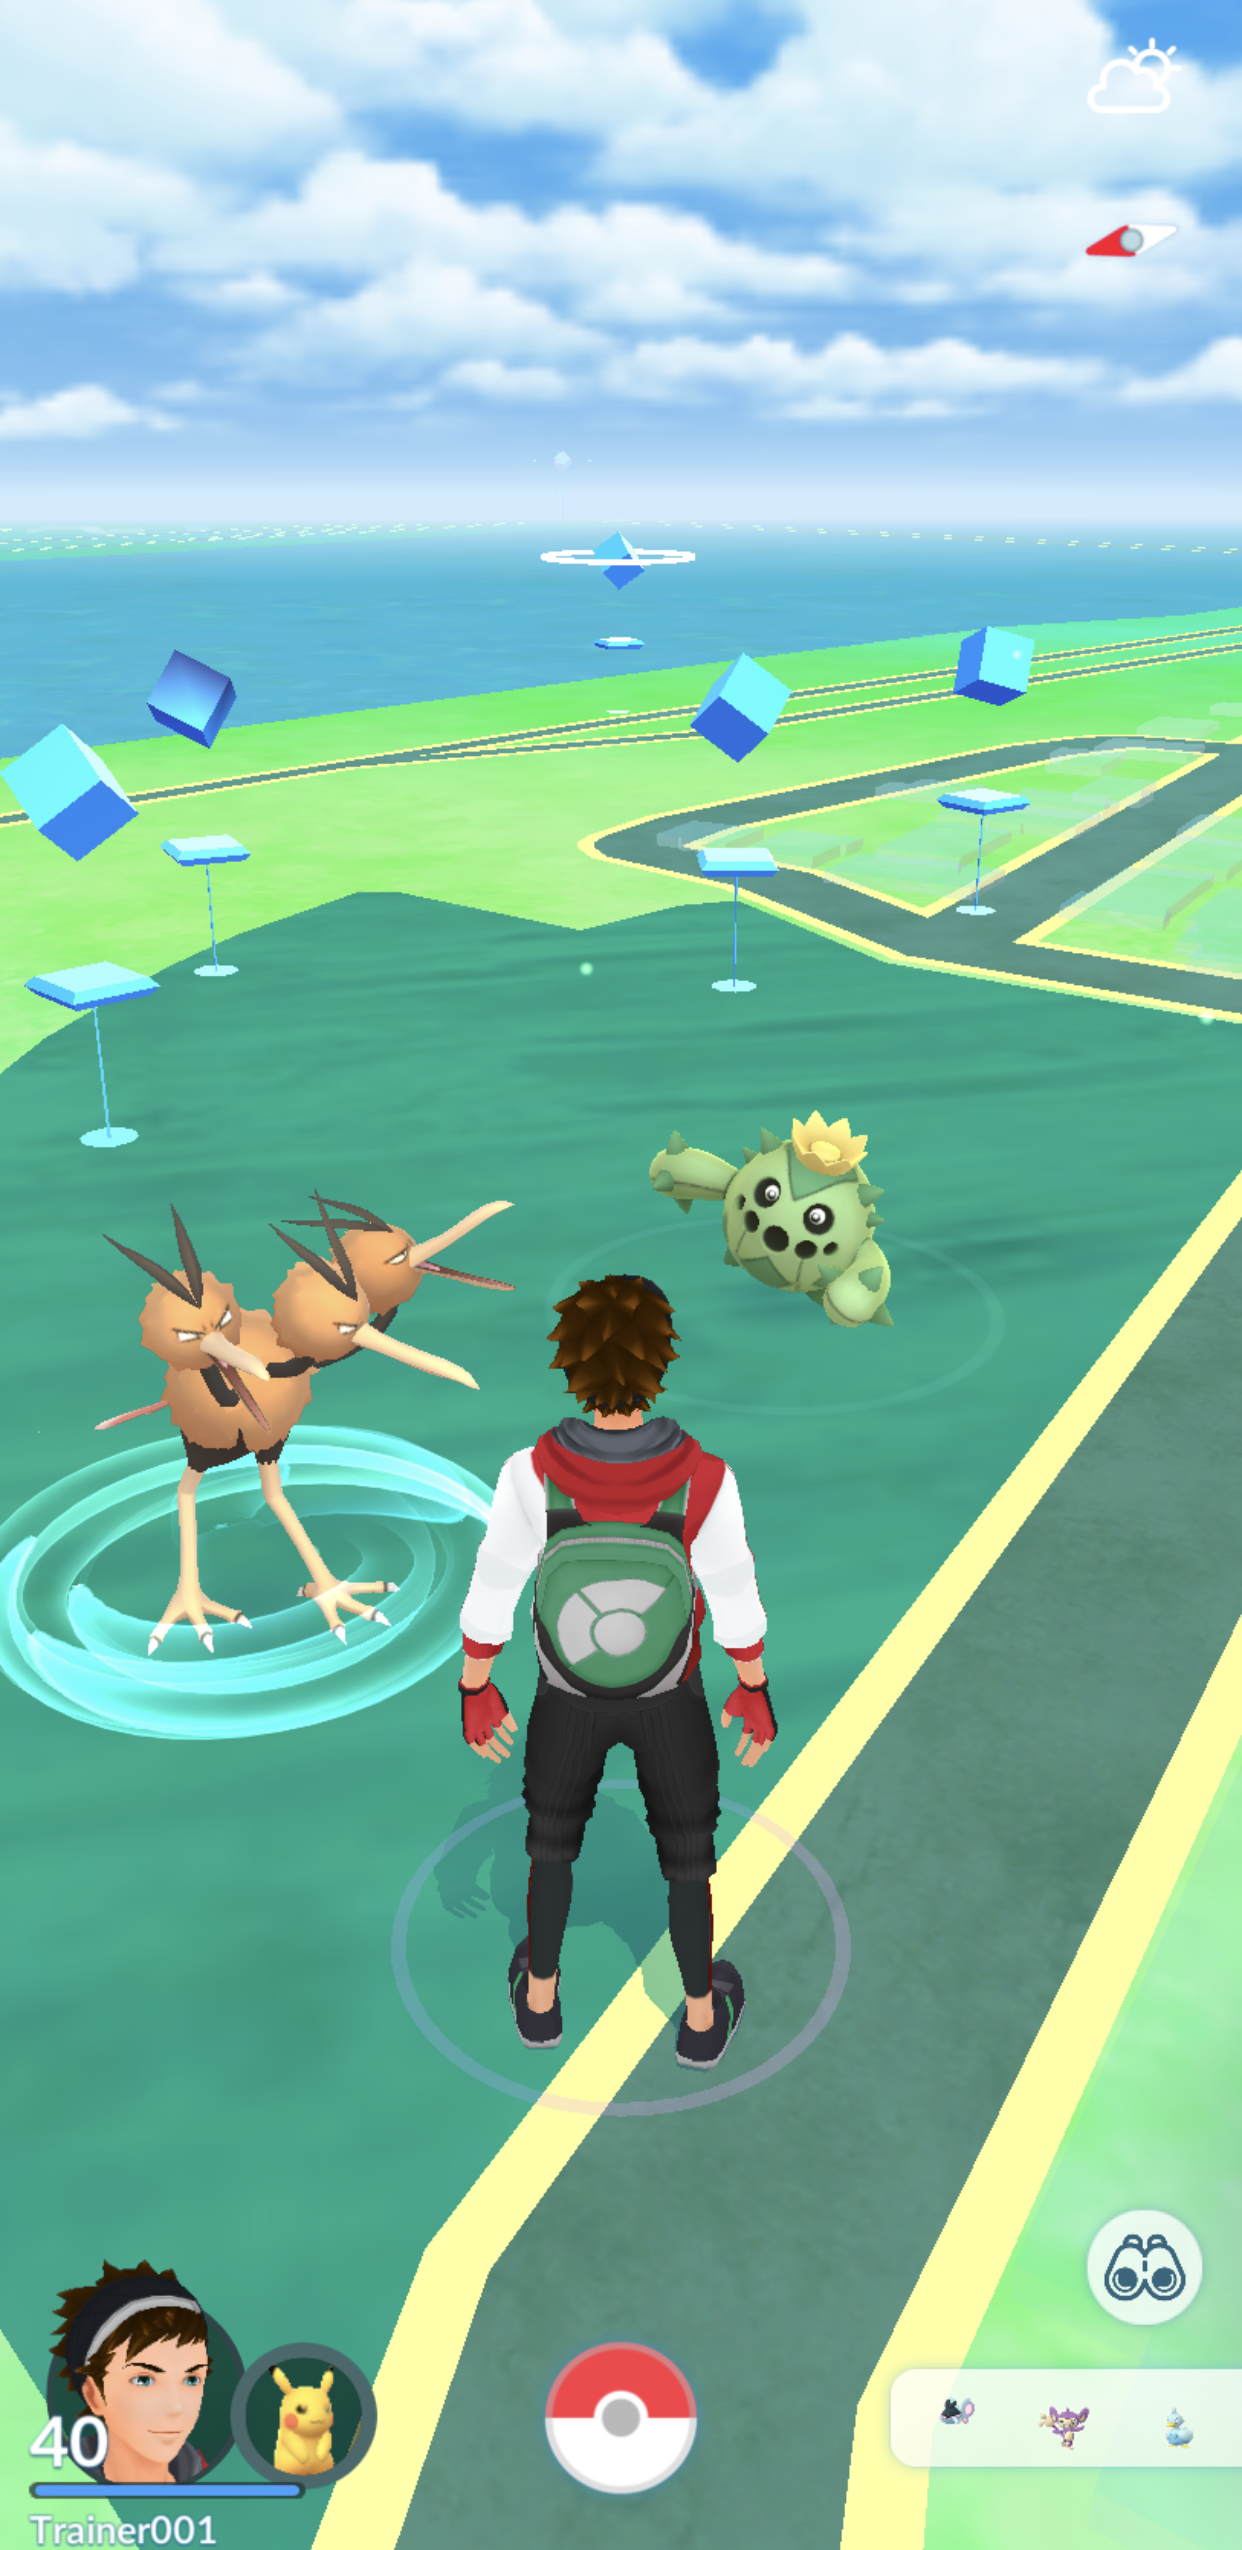 A player approaches a wild Dodrio and Cacnea in Pokémon Go (2016), Niantic